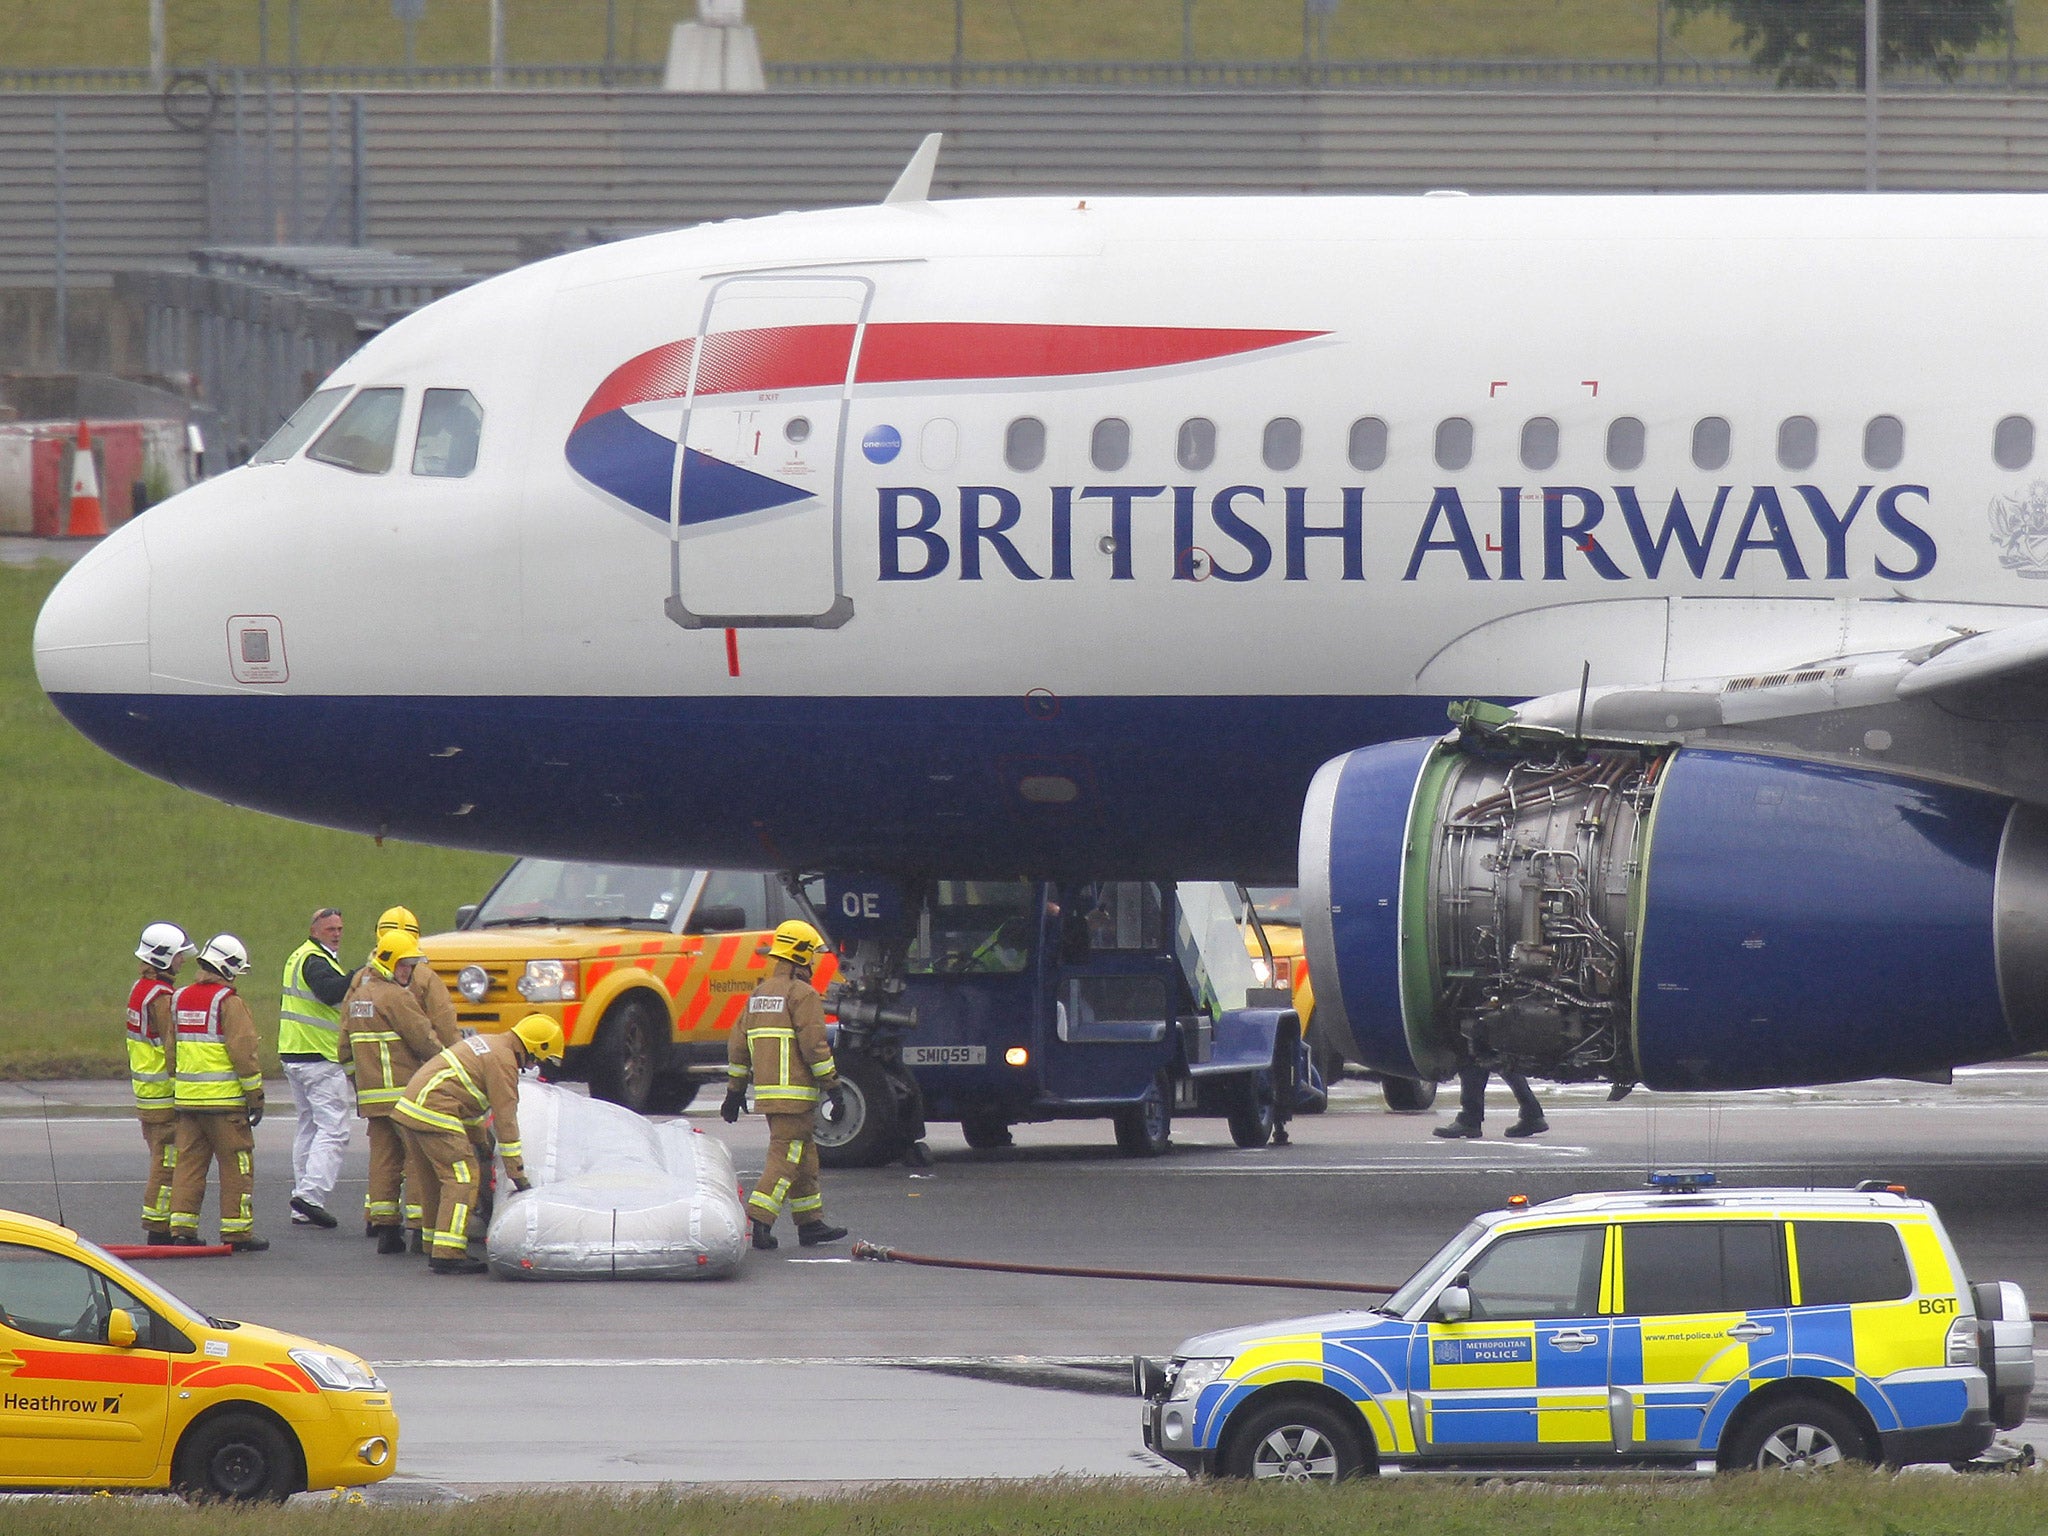 24 May 2013: Emergency services attend a British Airways passenger plane after it had to make an emergency landing at Heathrow airport